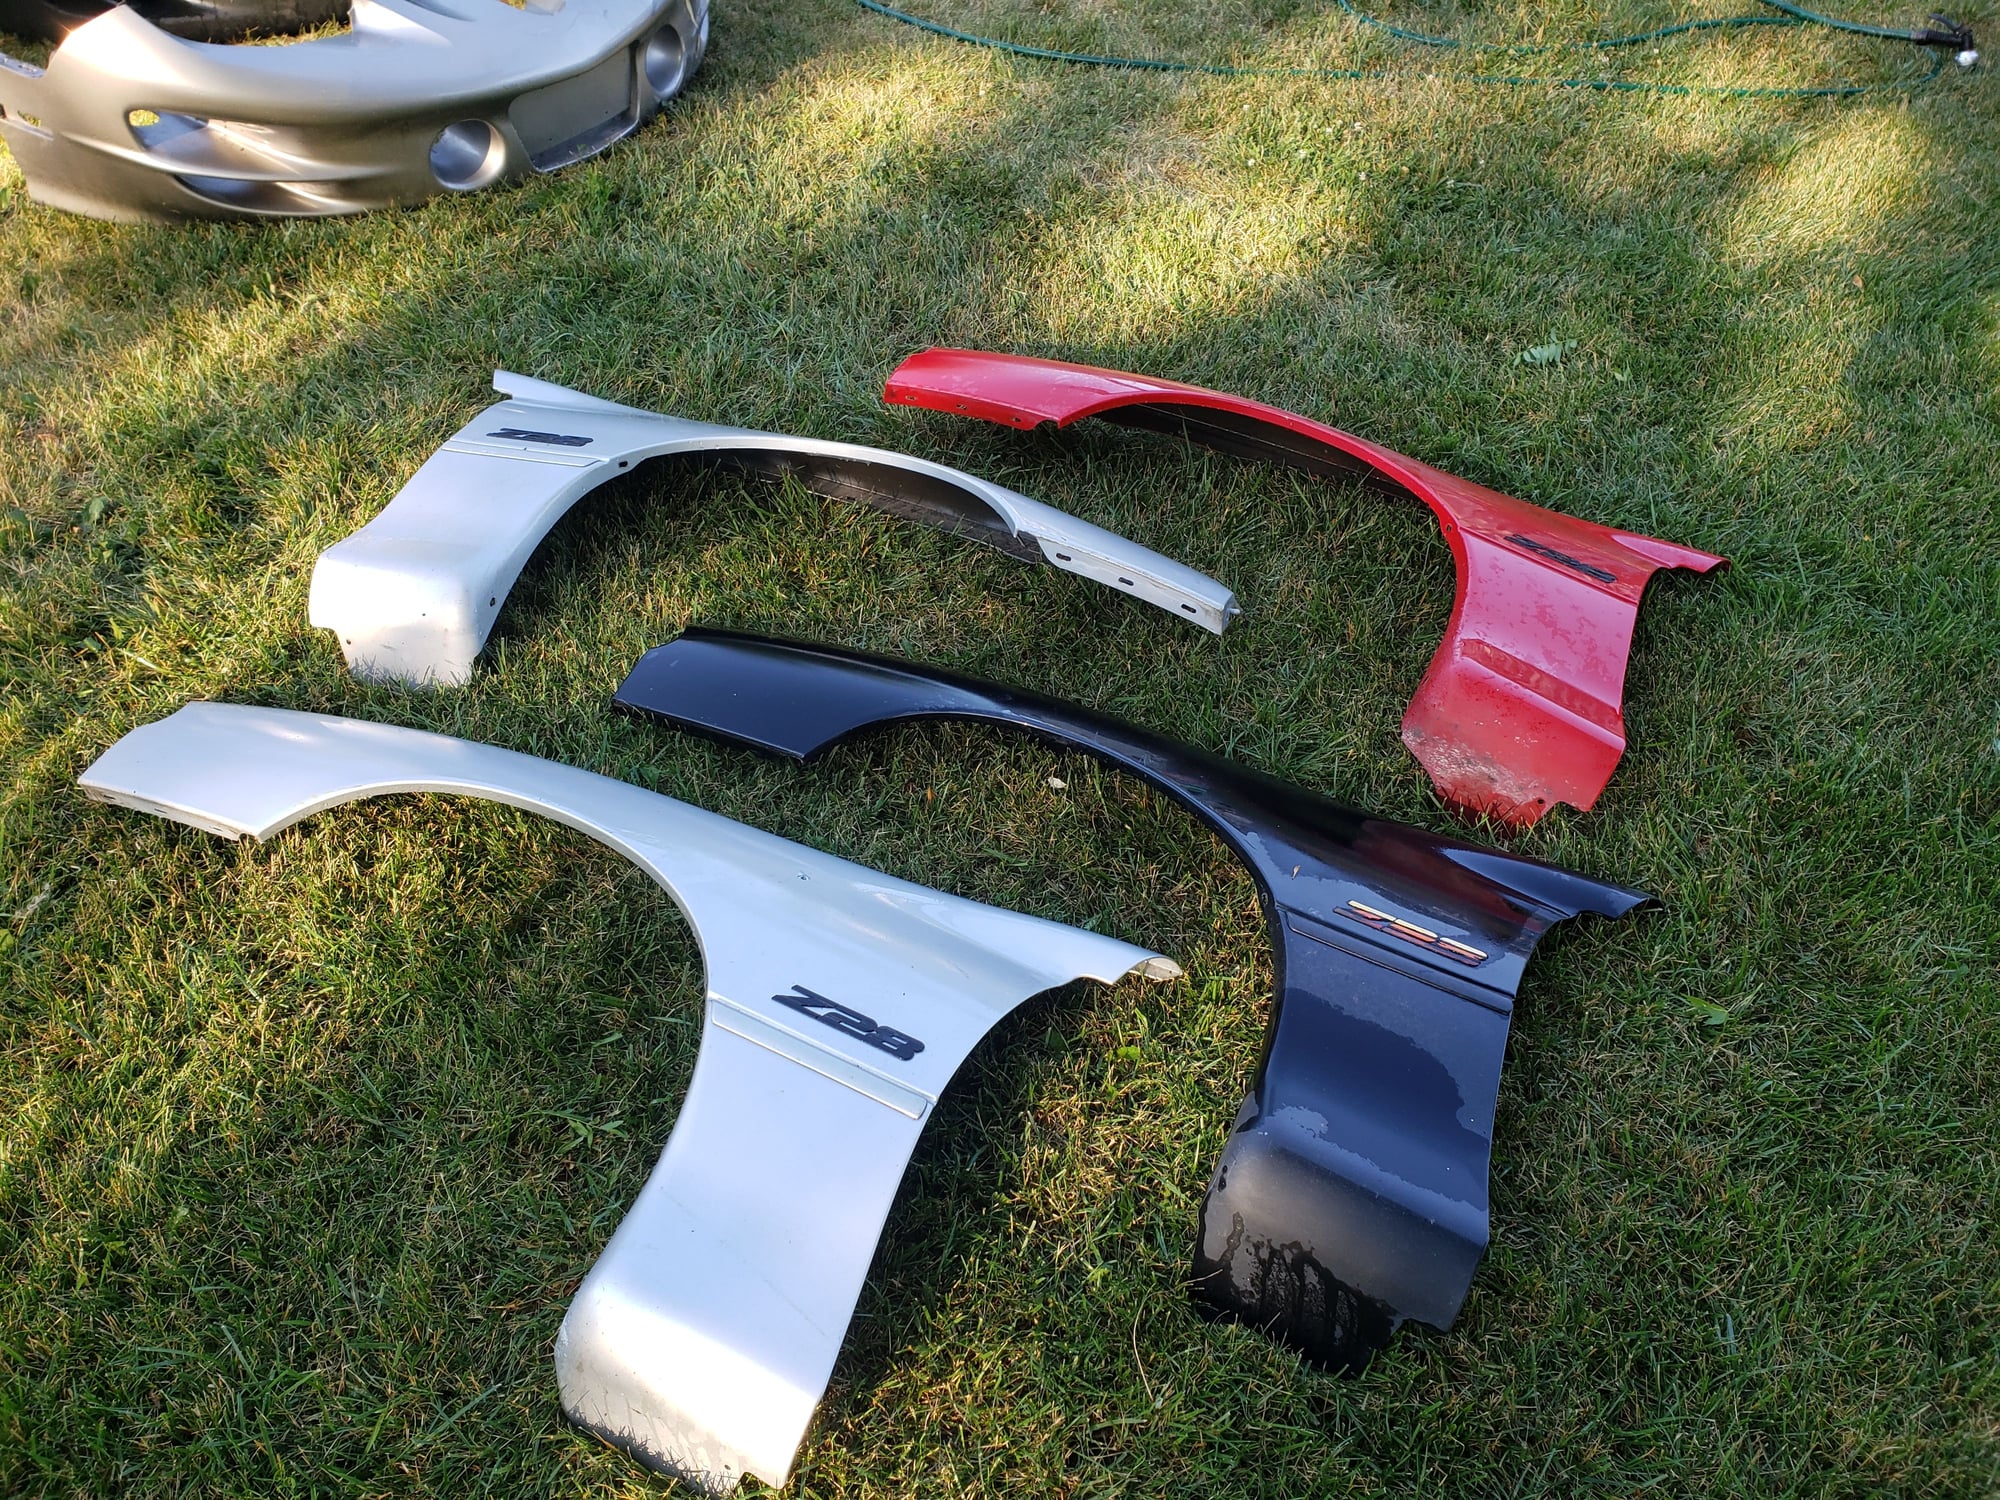 Miscellaneous - All kinds of f body parts,body,harnesses,lights,interior and more - Used - 1993 to 2002 Chevrolet Camaro - 1993 to 2002 Pontiac Firebird - Hanover Park, IL 60133, United States